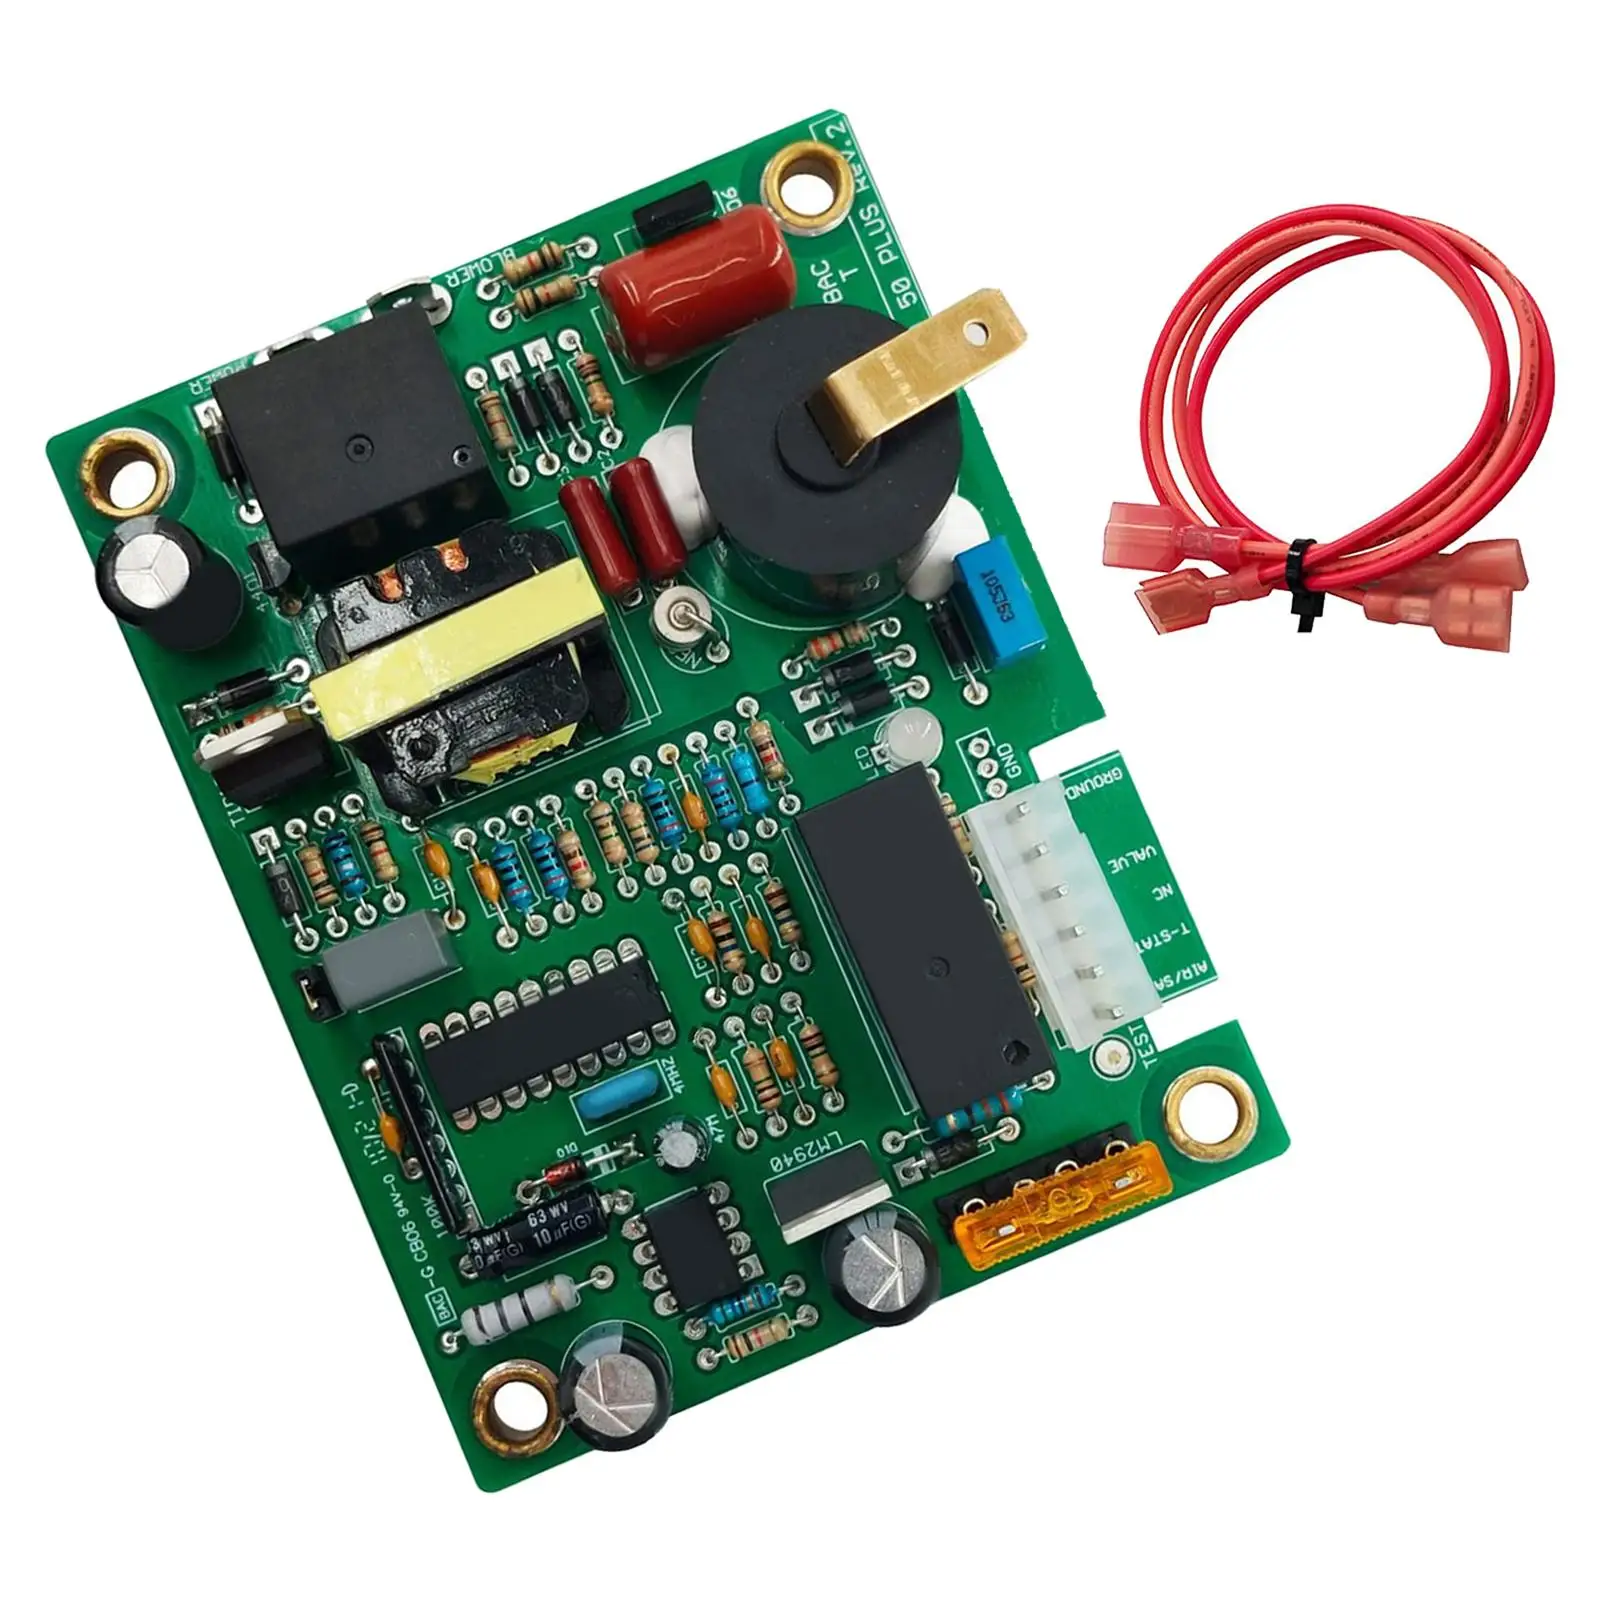 Ignitor Board Accessories Direct Replace with Fan Control Ignition Controls Board Module Boards for Upgrade Older Furnaces